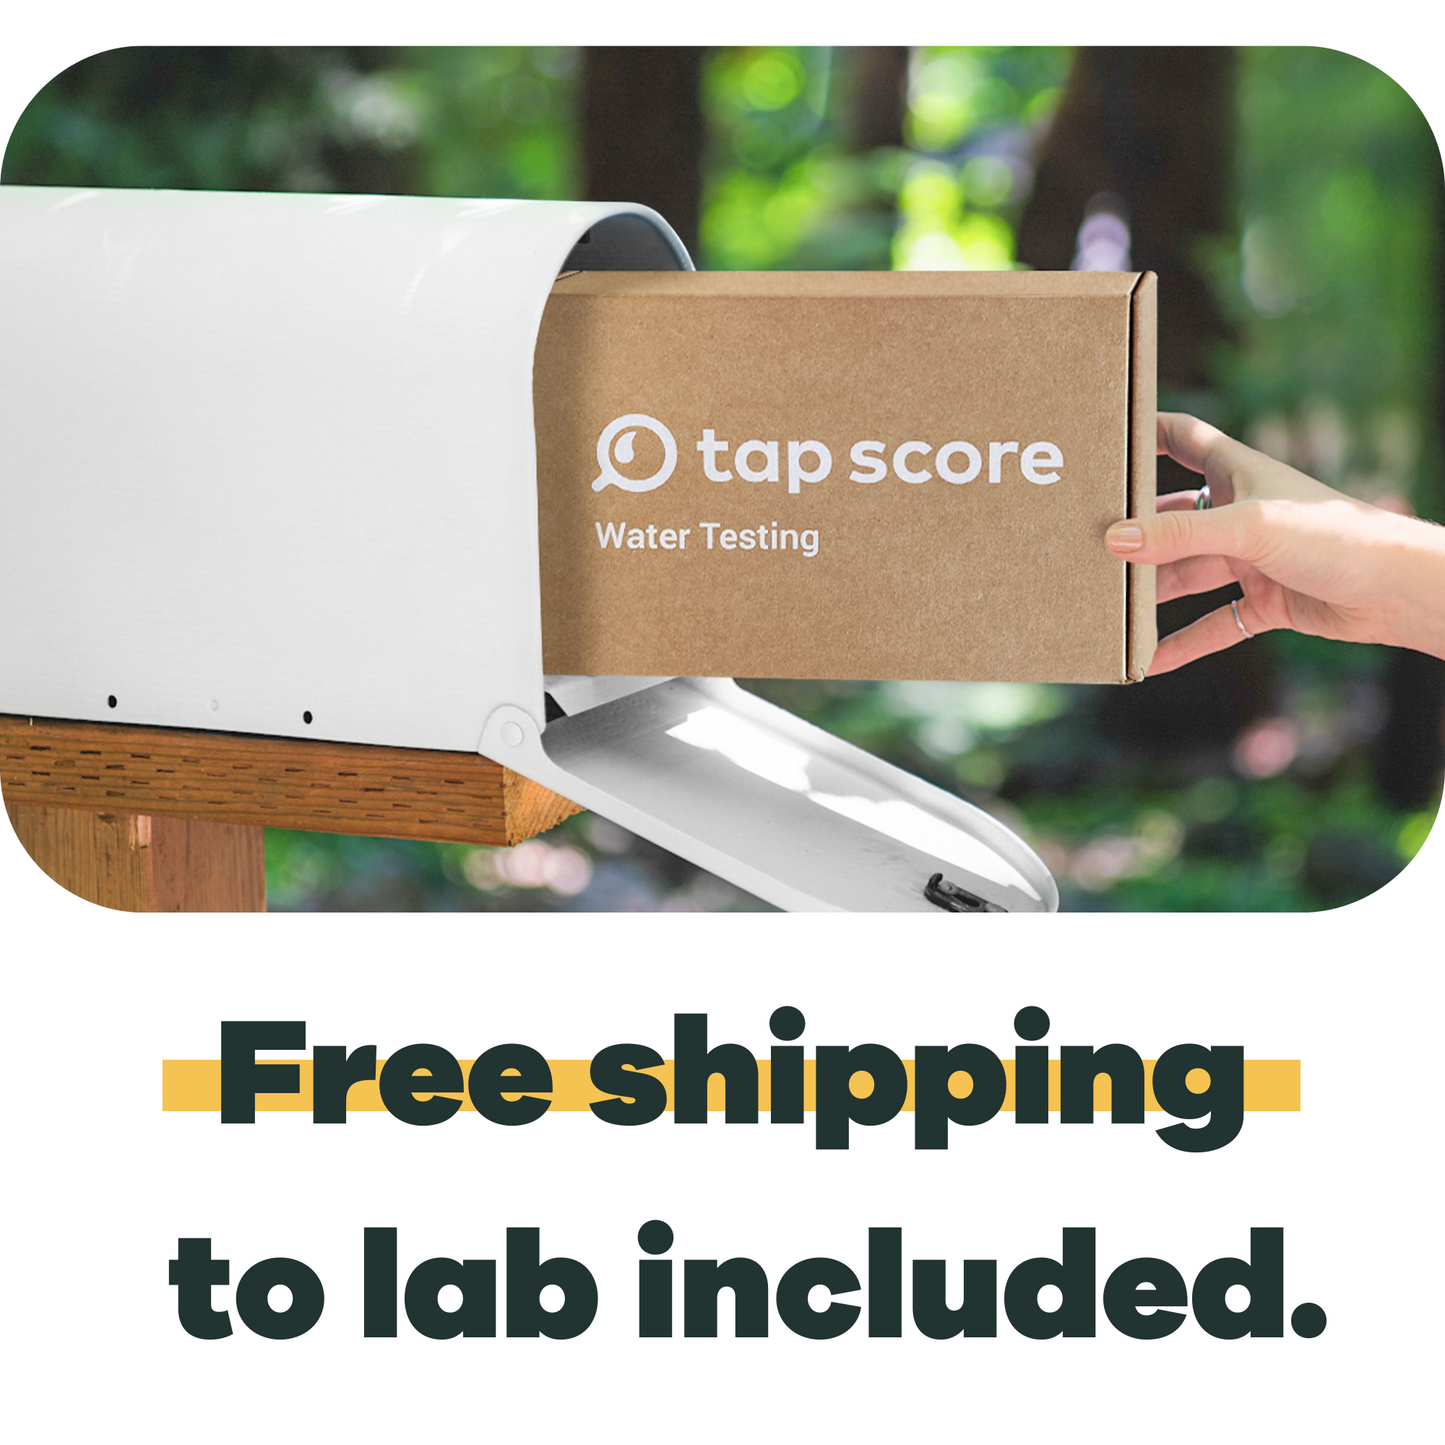 Easy shipping on all Tap Score Kits